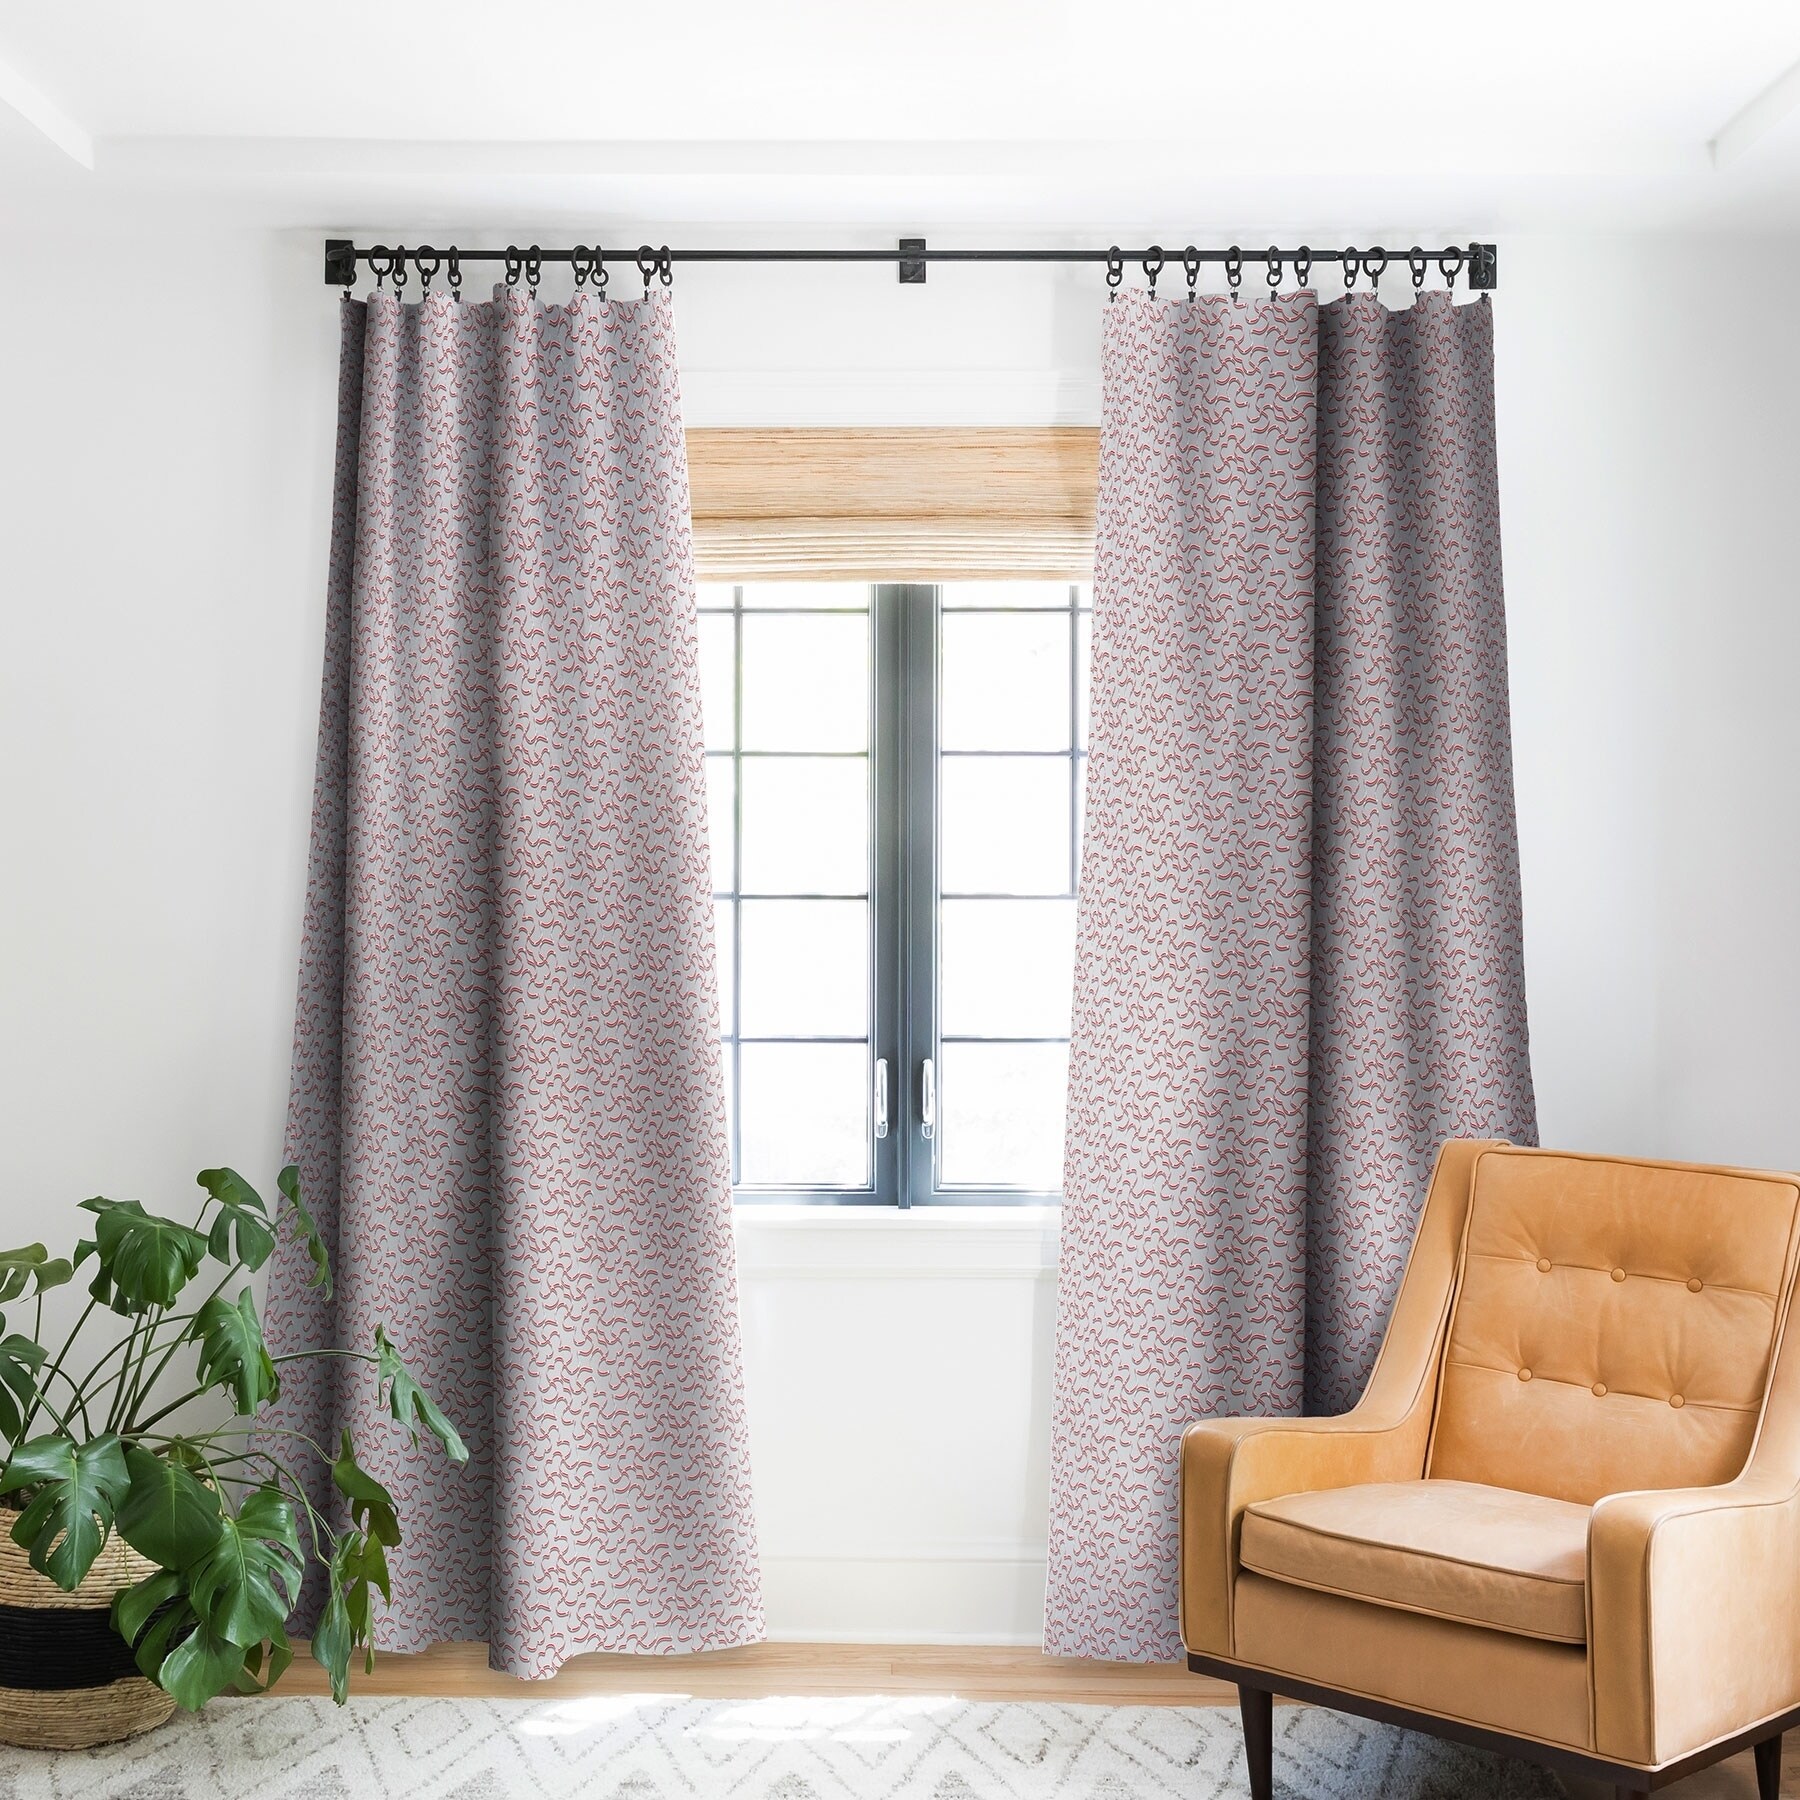 The 13+ Hidden Facts of Red And Gray Curtain: The print craft makes ...